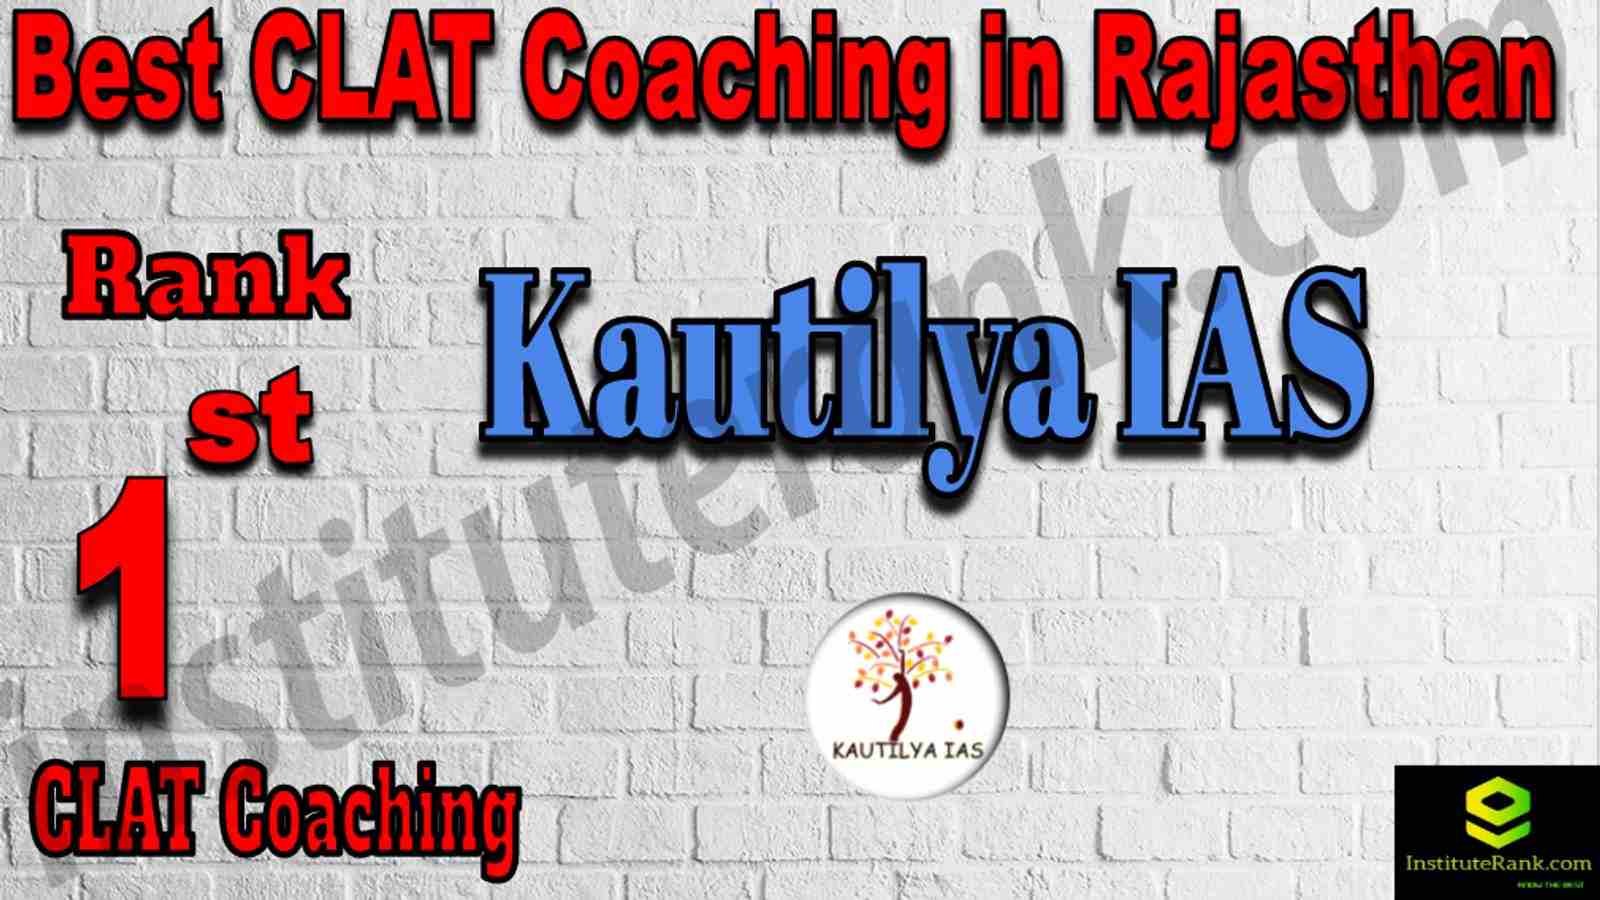 1st Best Clat Coaching in Rajasthan